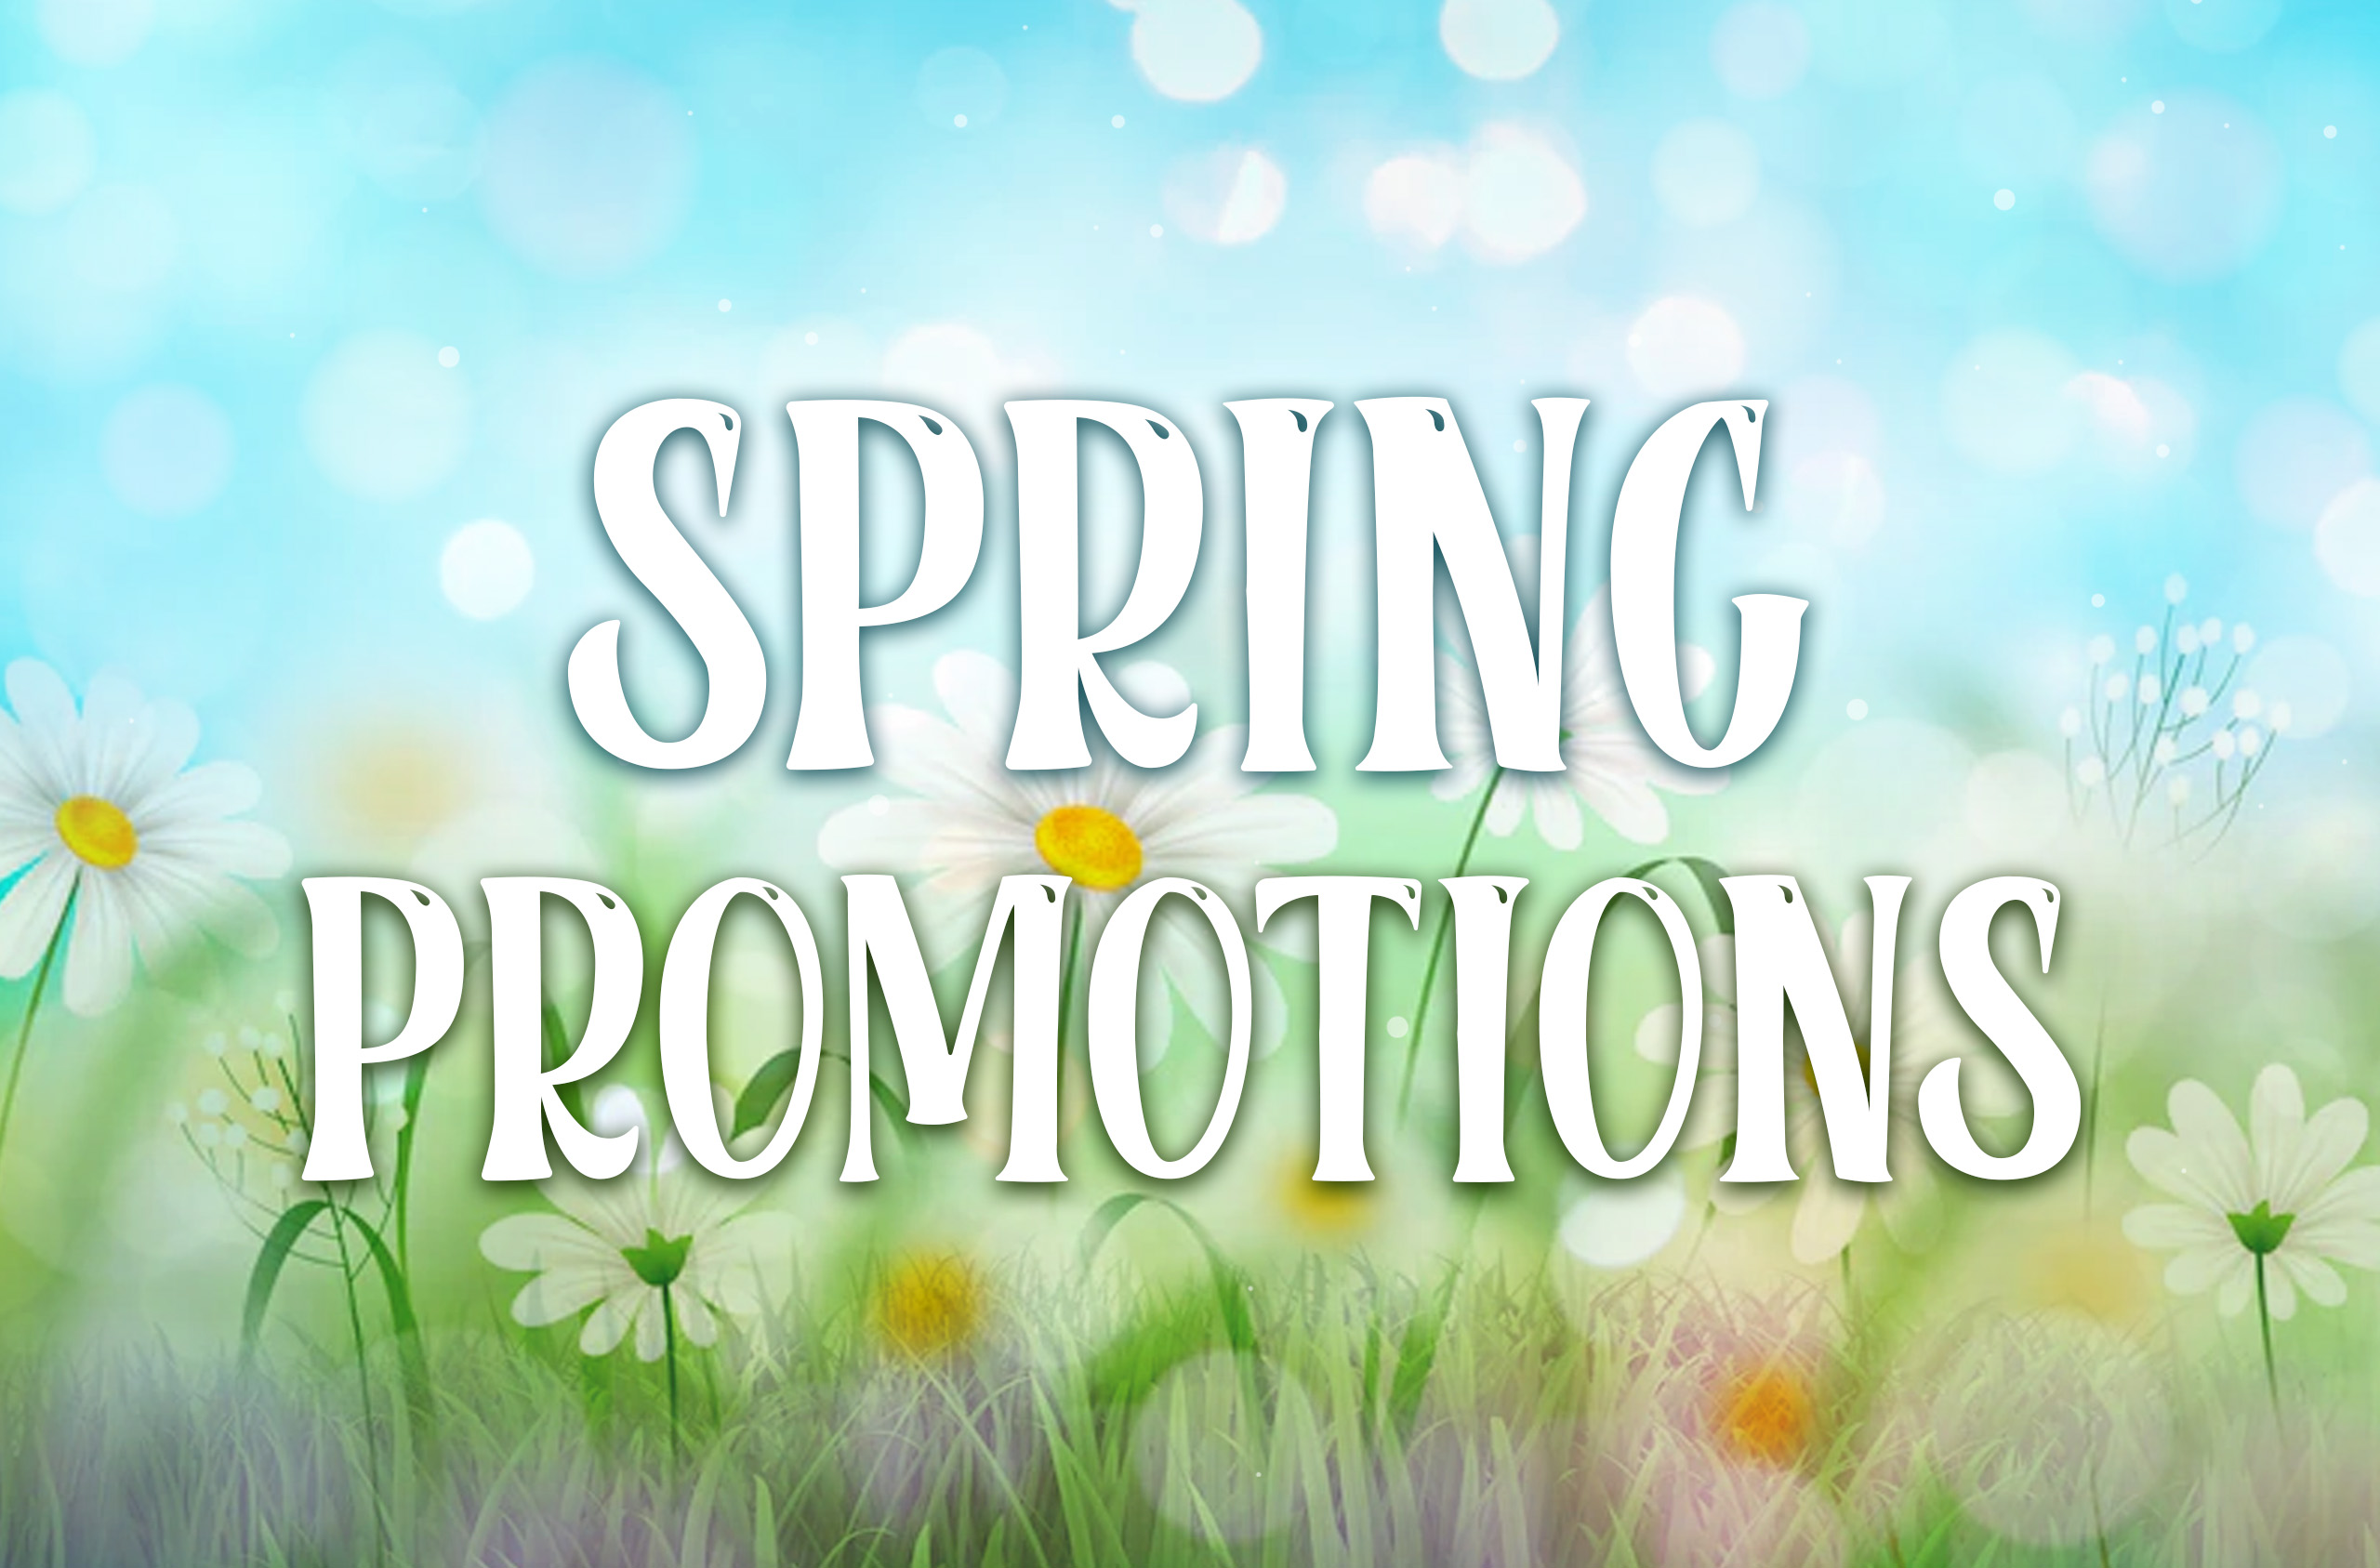 Special Promotions for 2022 Season